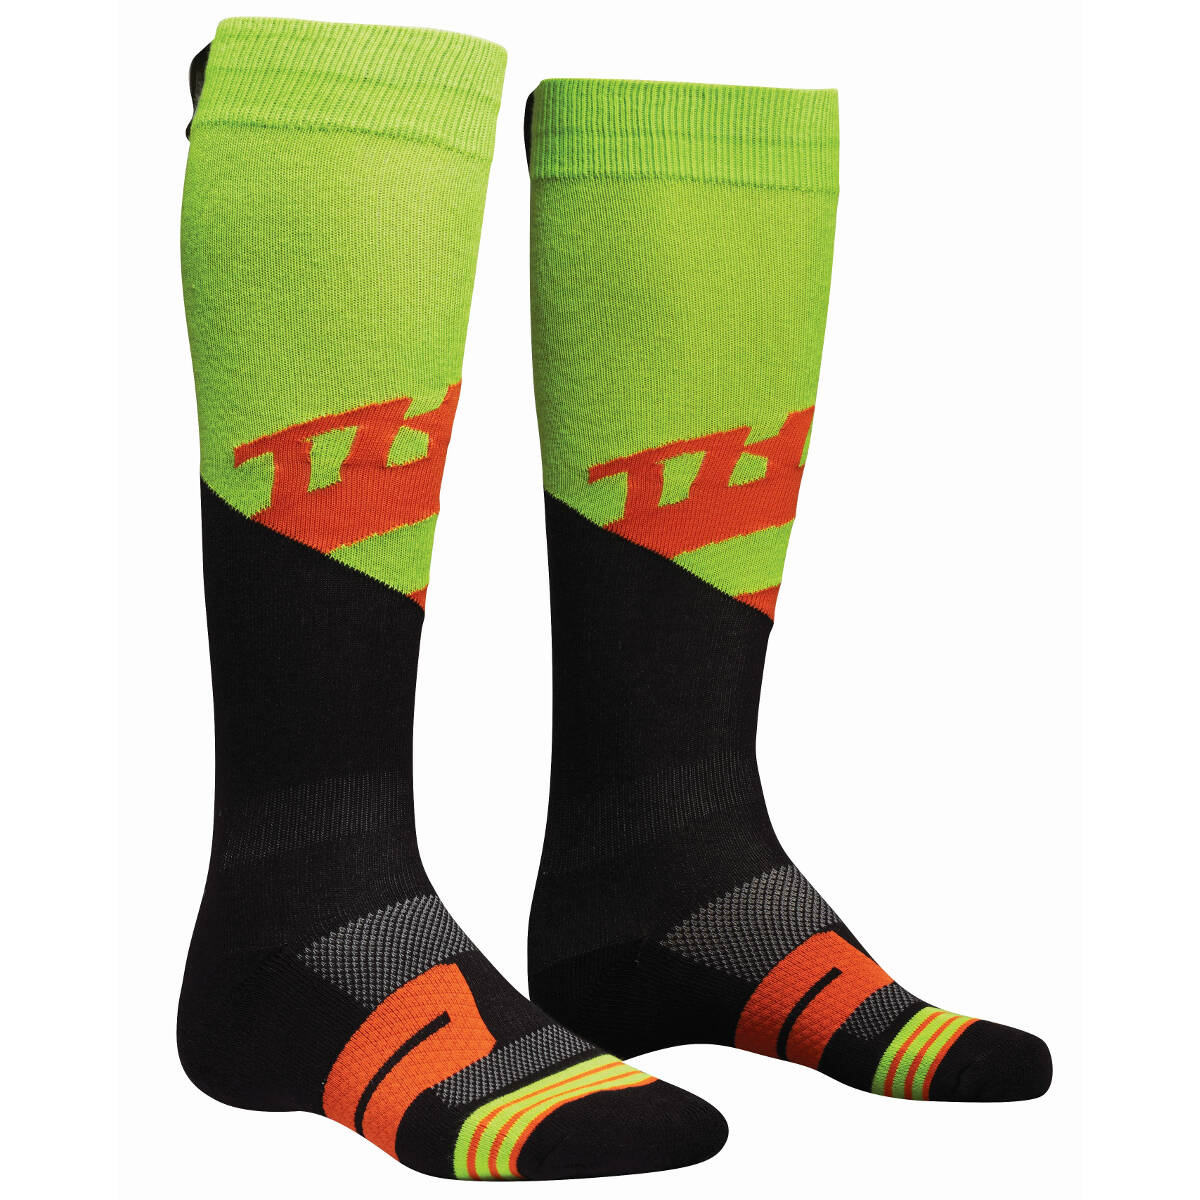 Thor Chaussettes Moto Knit Rive Lime/Red Orange